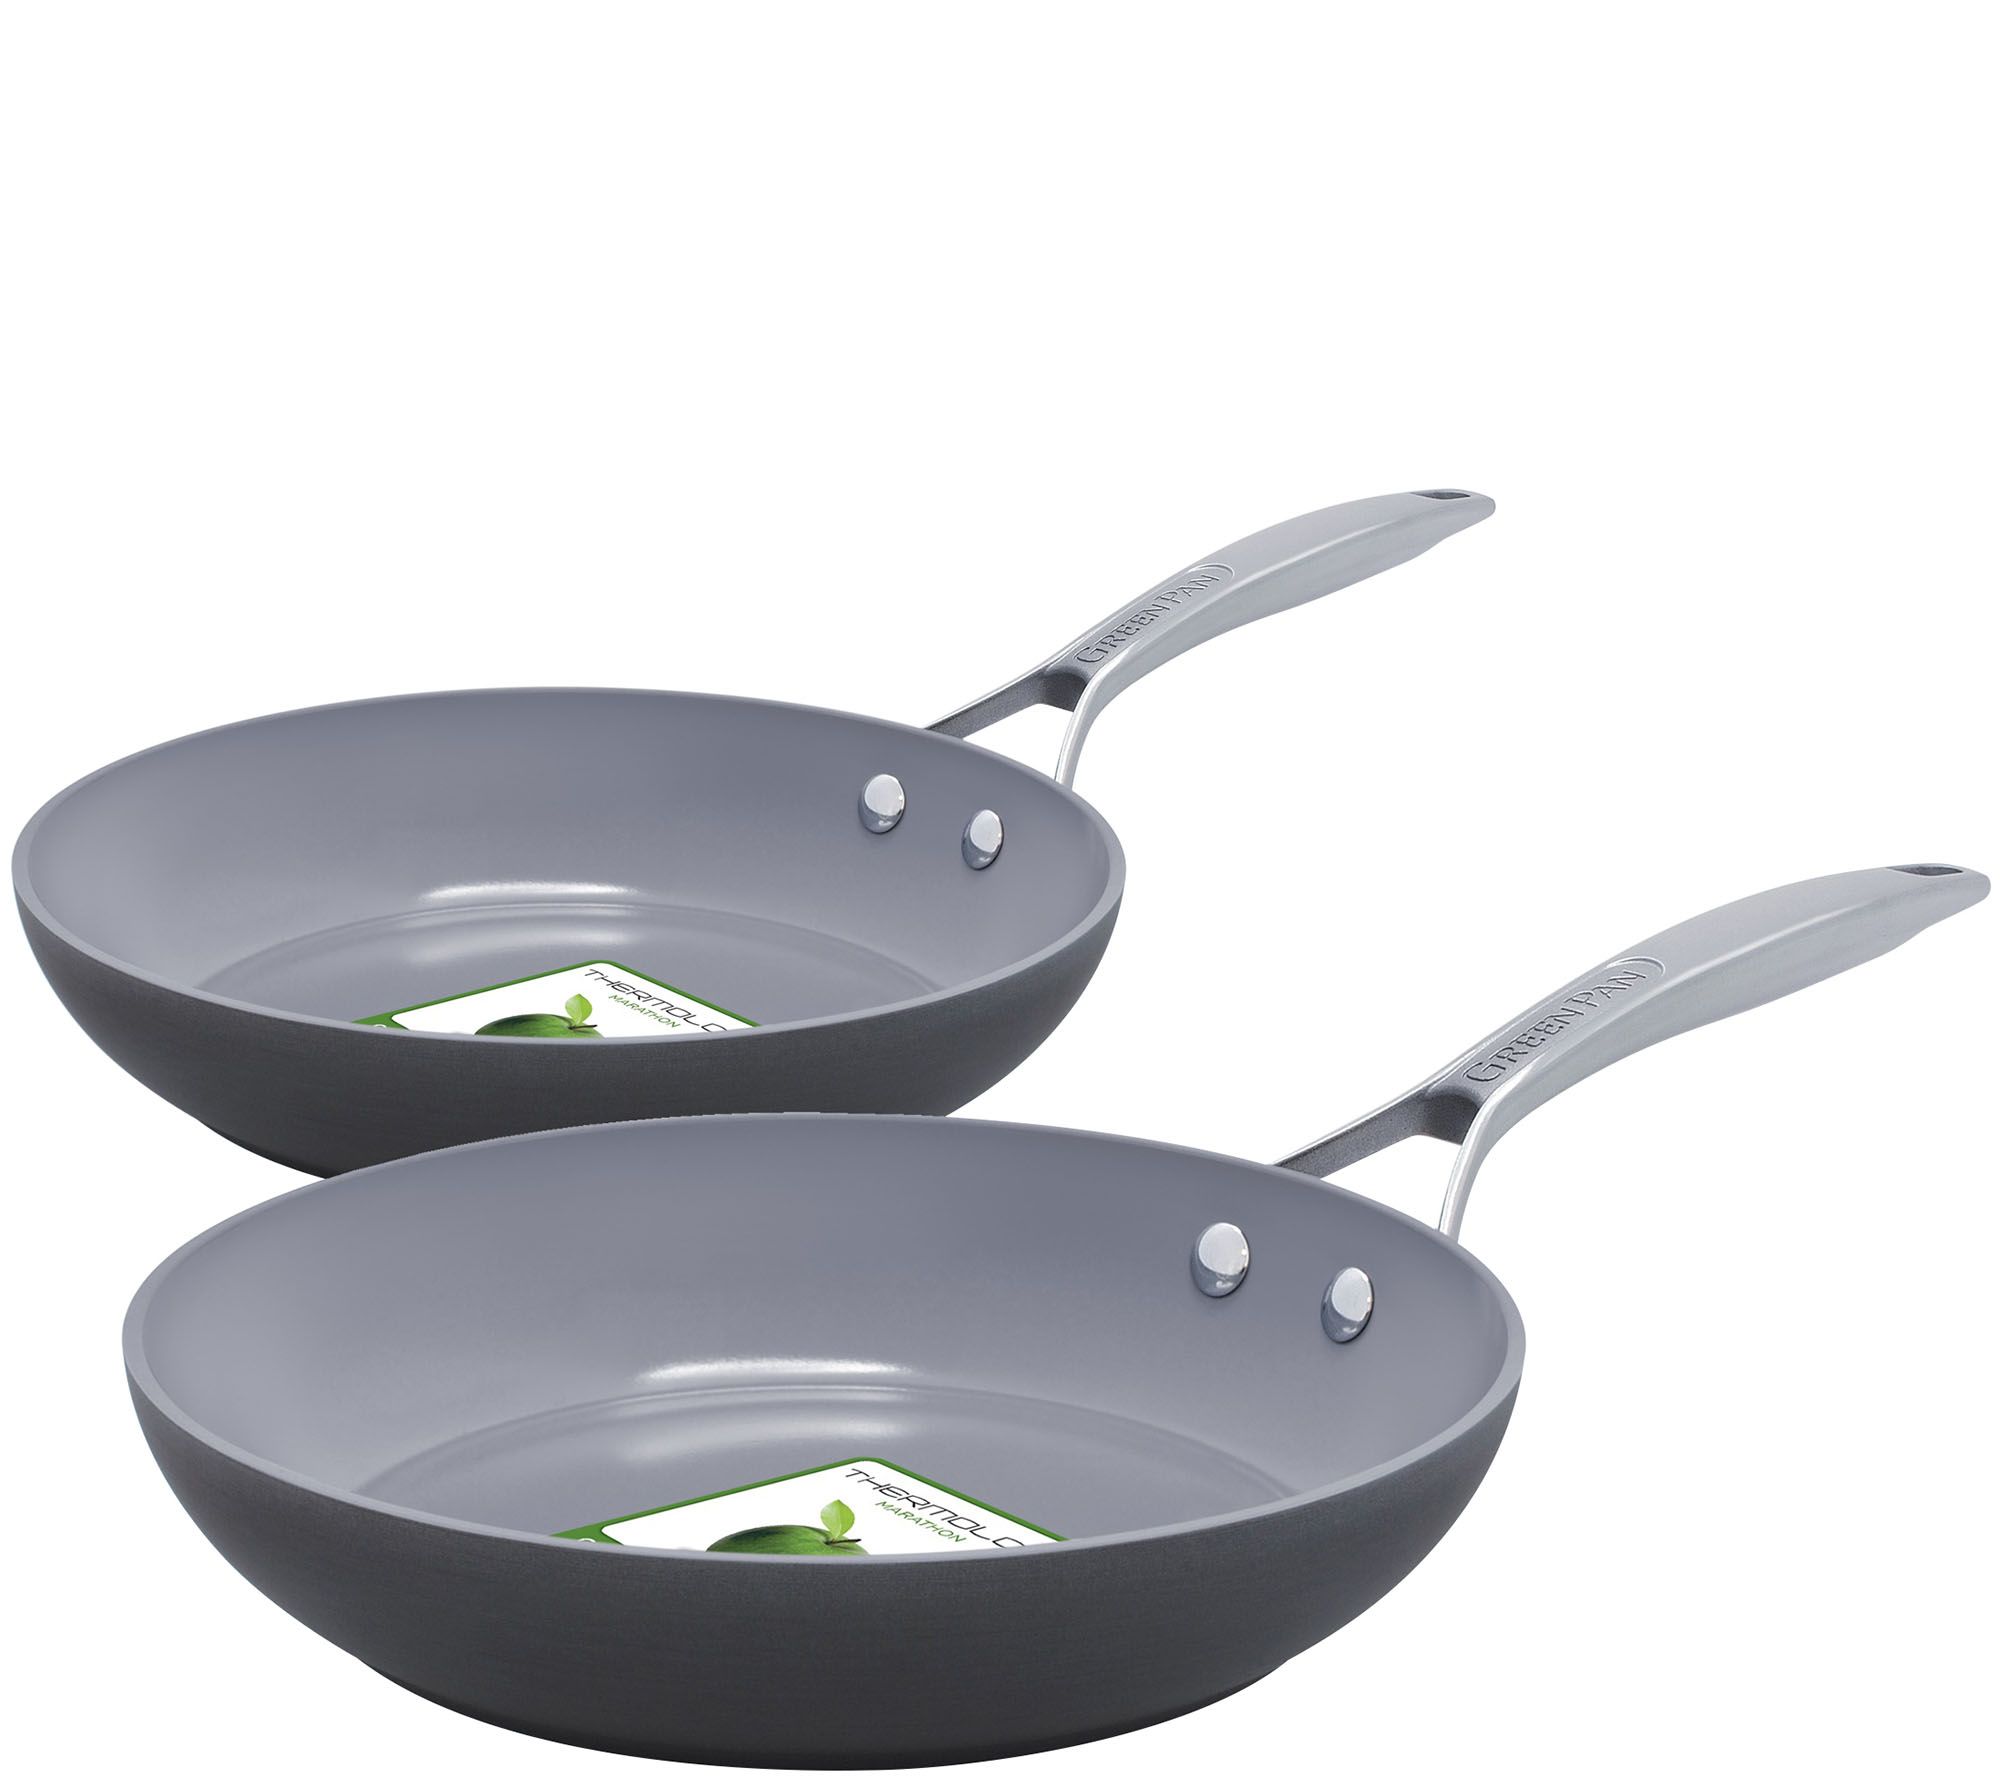 GreenPan Valencia Pro Ceramic Nonstick 10 Fry Pan with Lid, Cookware